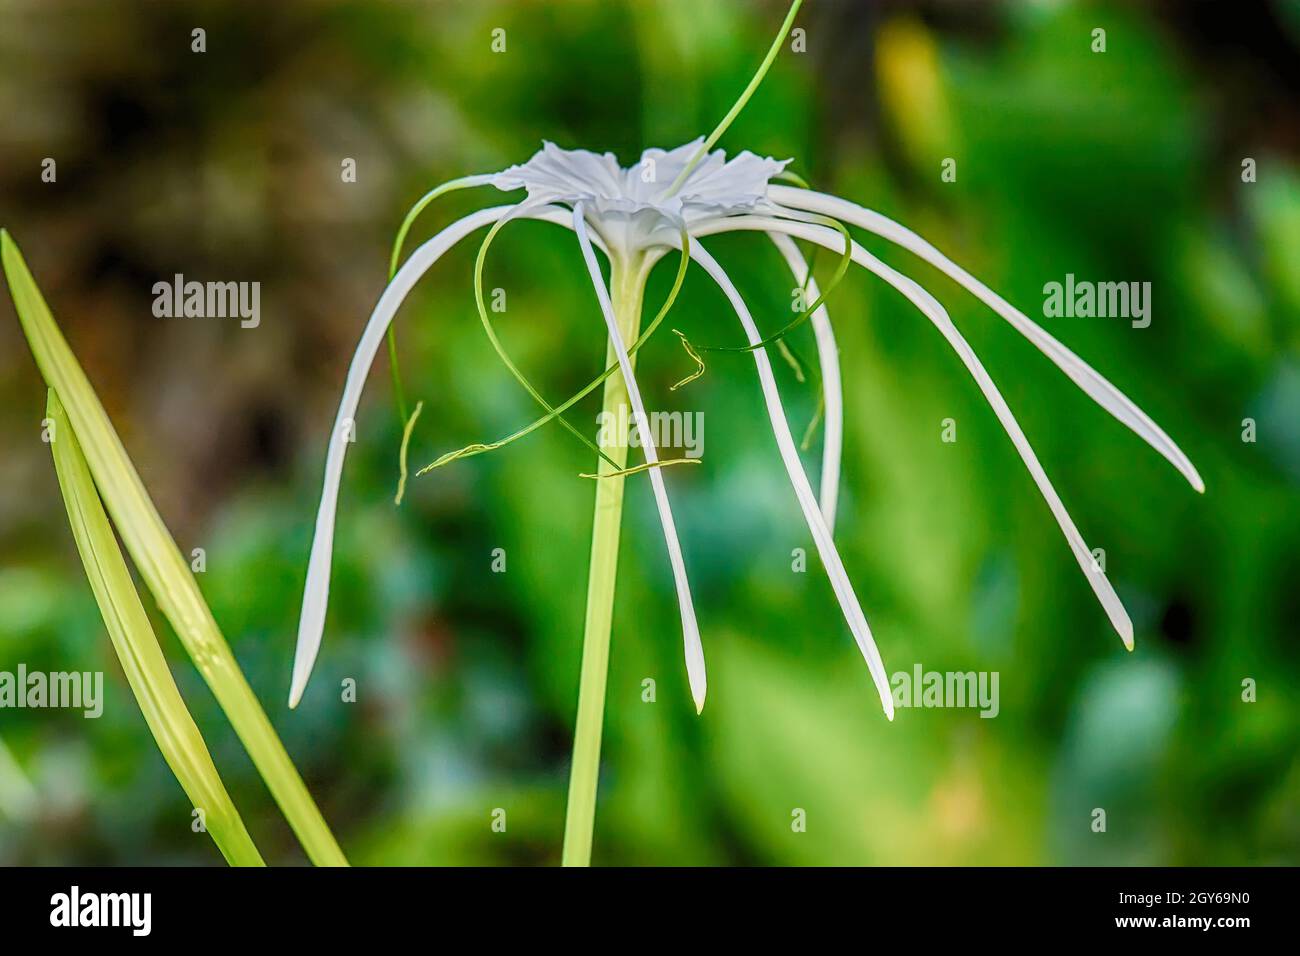 Crinum asiaticum or giant crinum lily on a nature background. Stock Photo